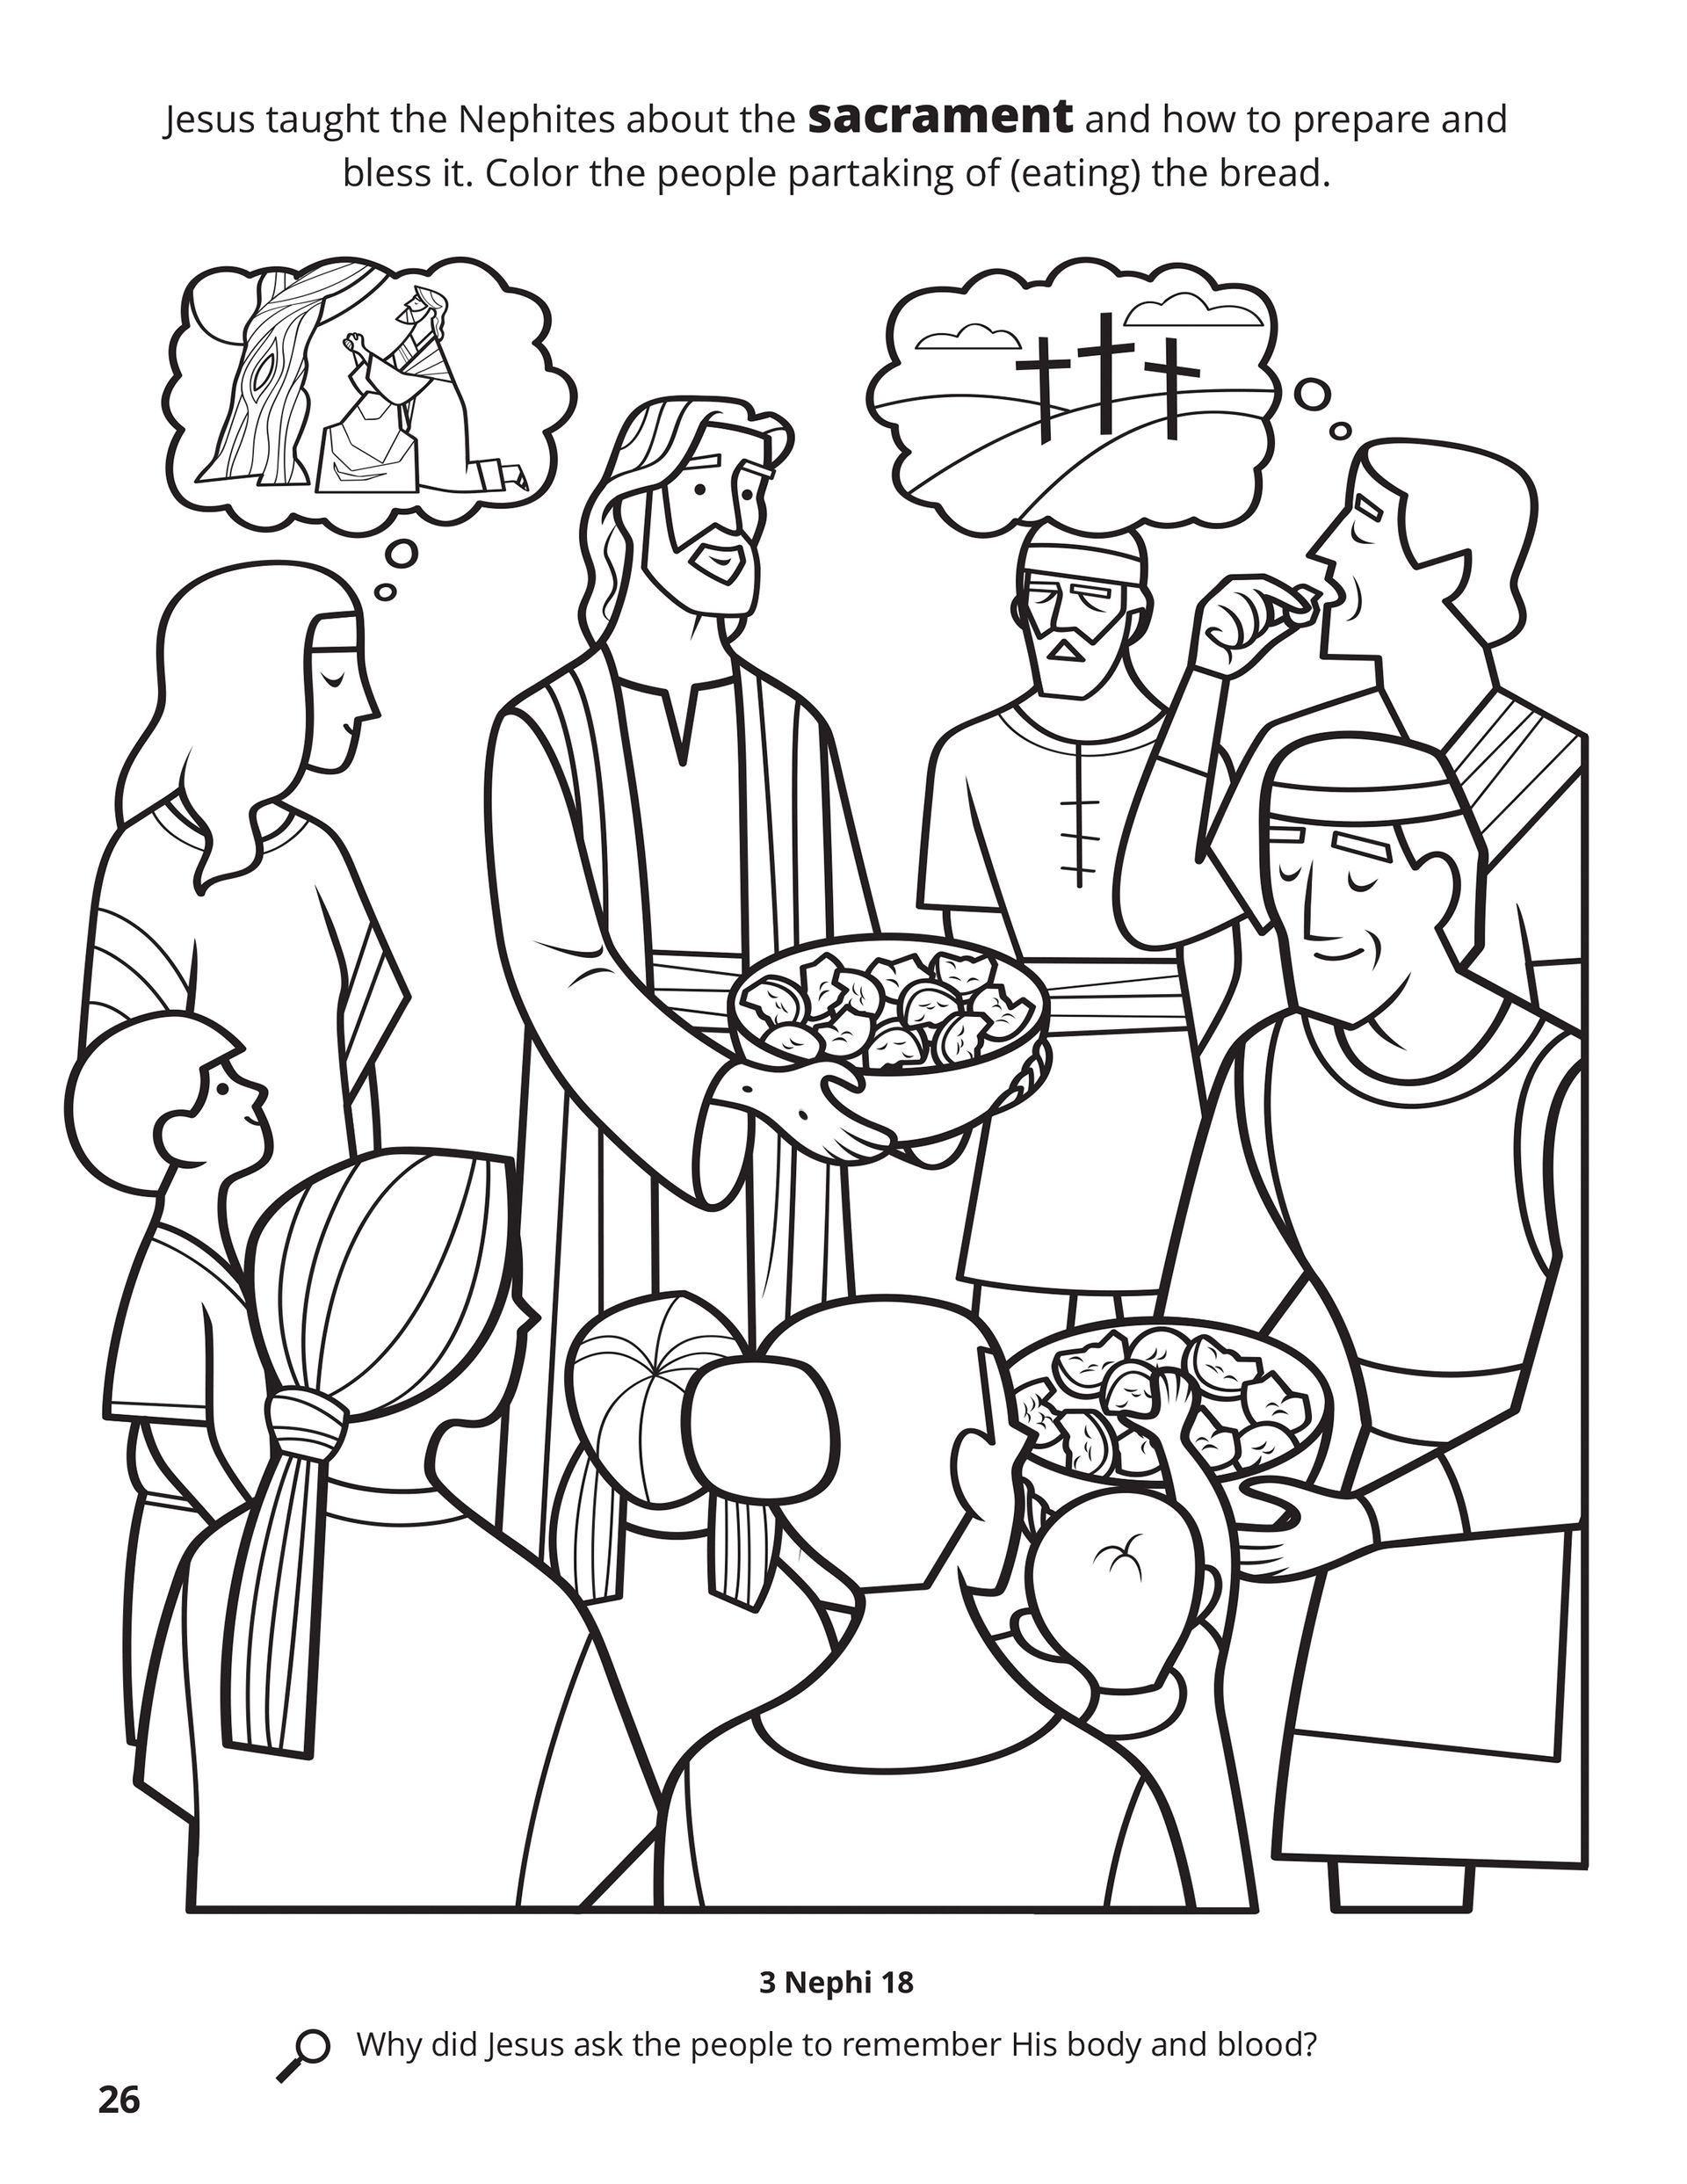 Jesus taught the Nephites about the sacrament and how to prepare and bless it. Color the people partaking of (eating) the bread. Location in the Scriptures: 3 Nephi 18. Search the Scriptures: Why did the Jesus ask the people to remember His body and blood?